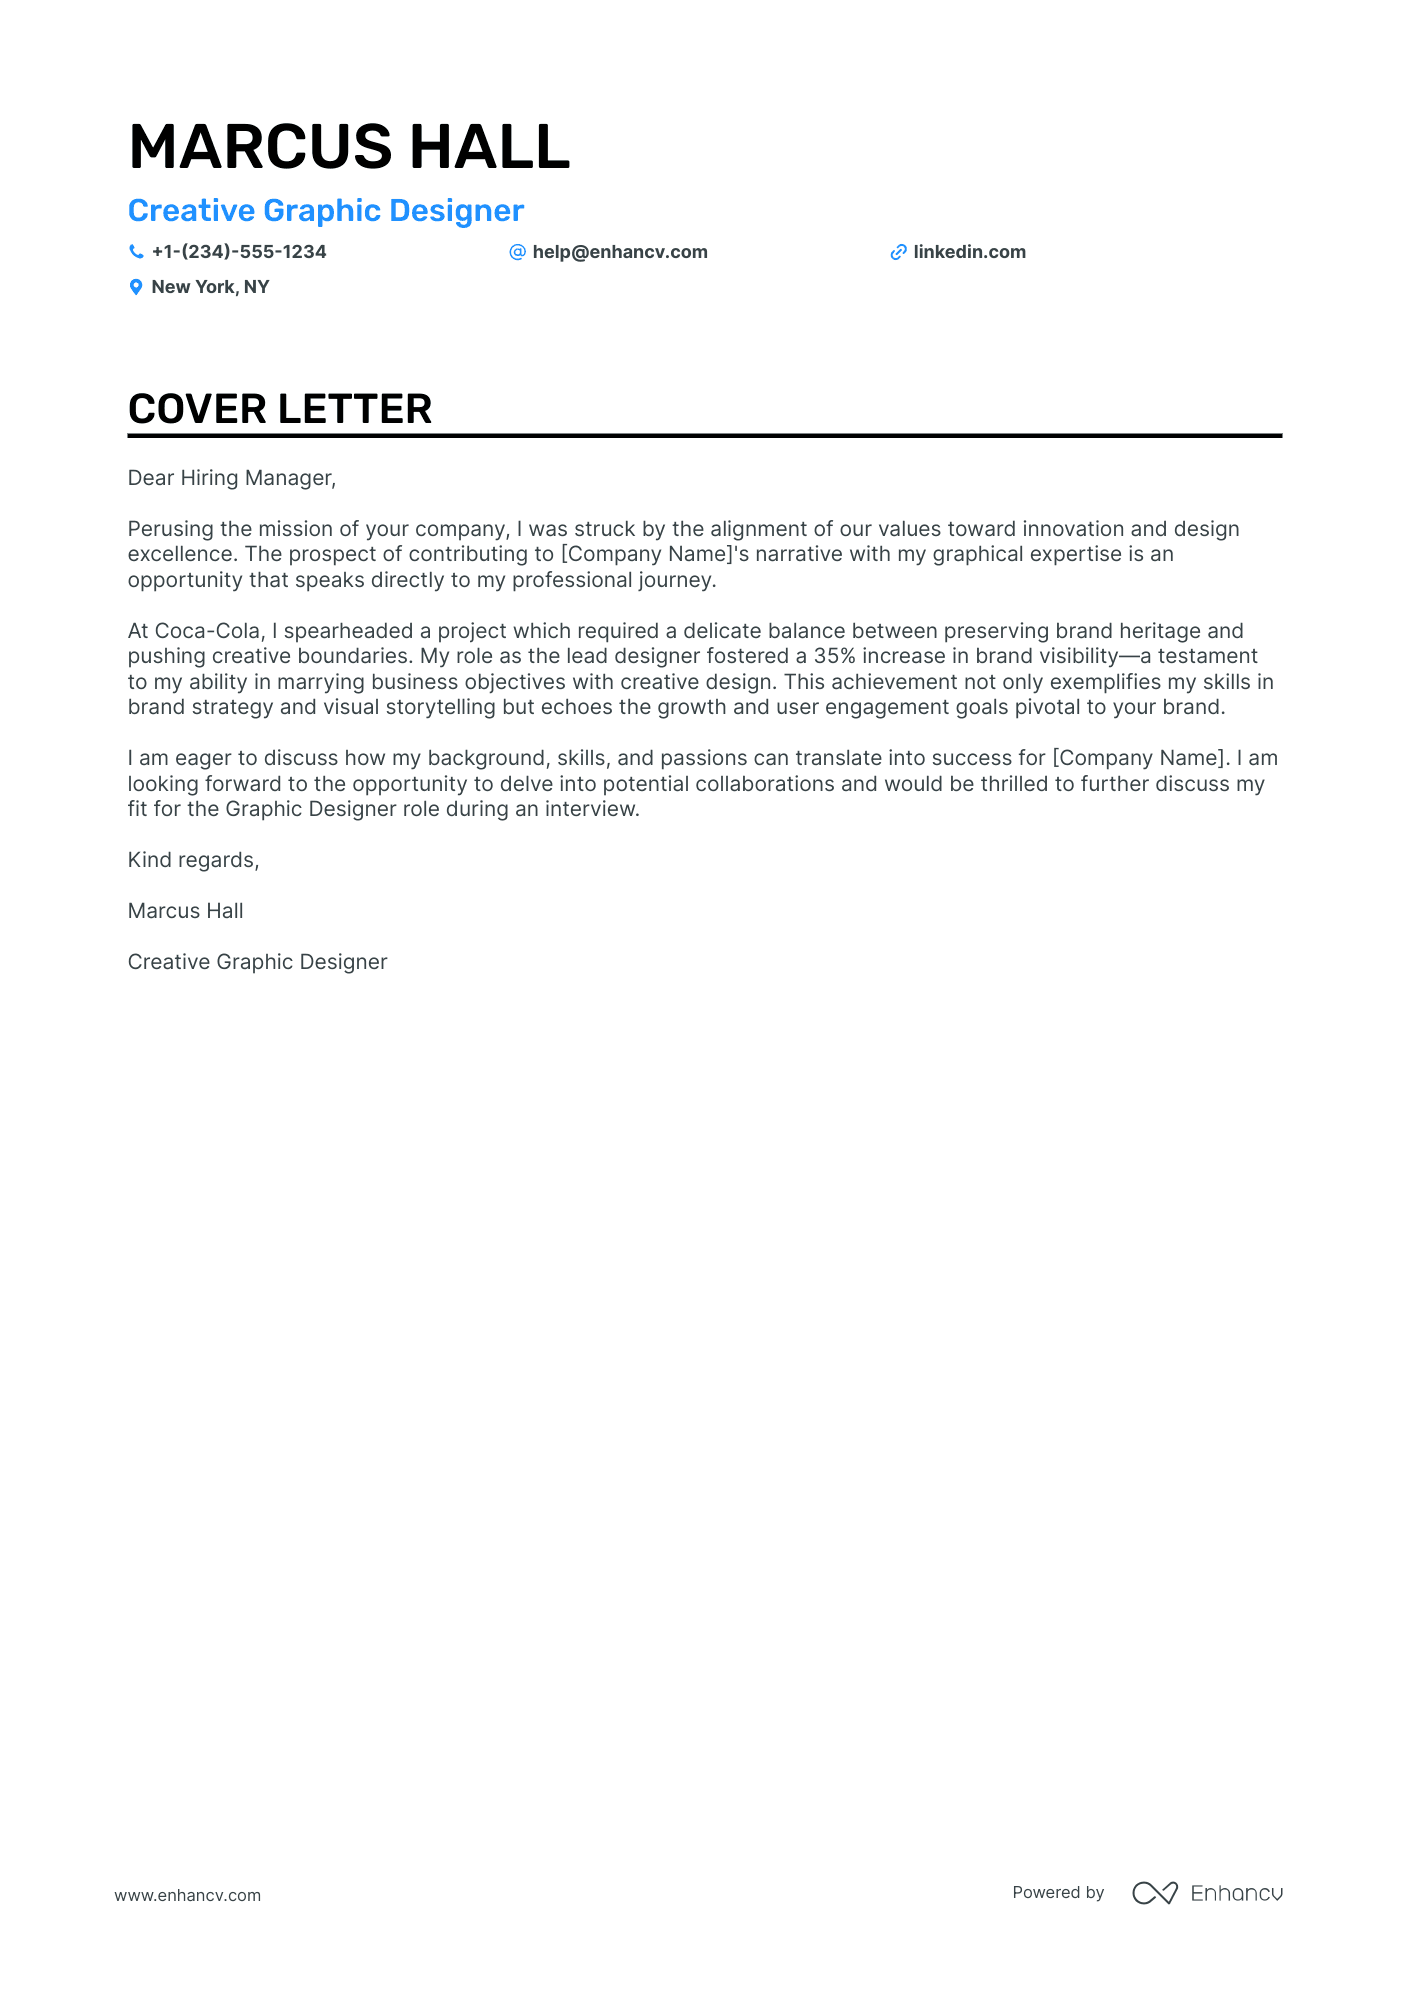 cover letter for designer with no experience